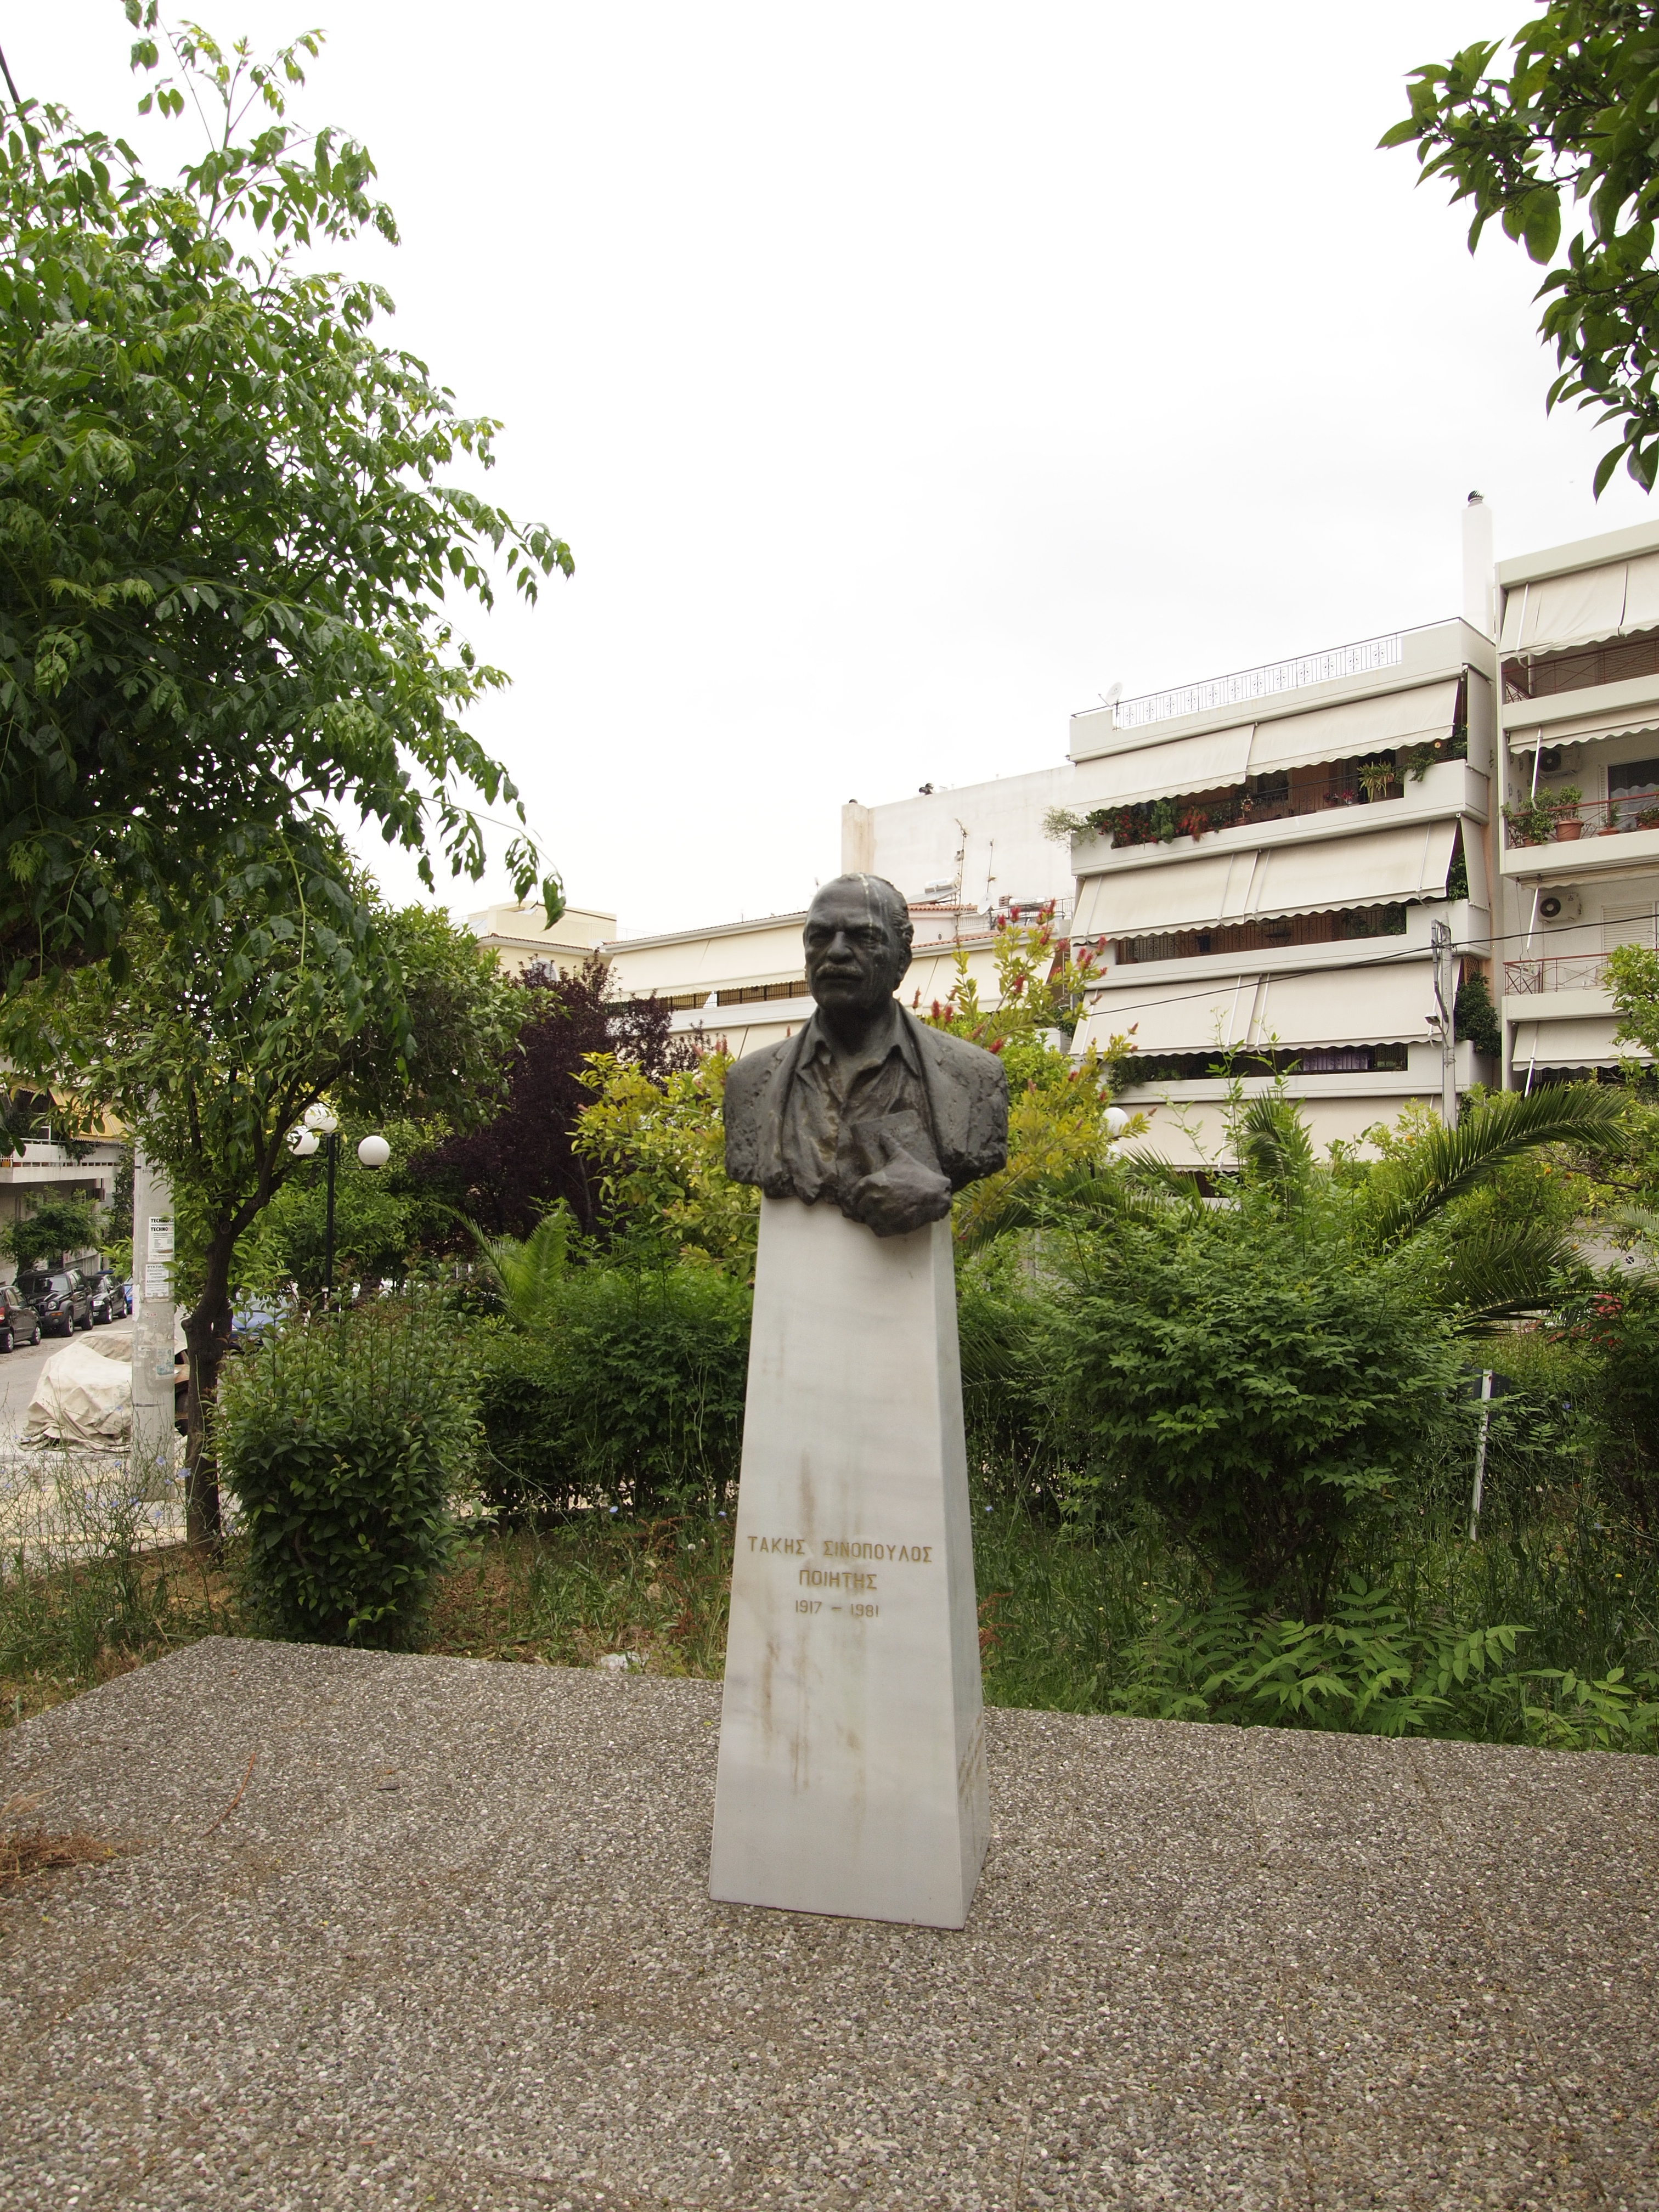 Bust of Takis Sinopoulos